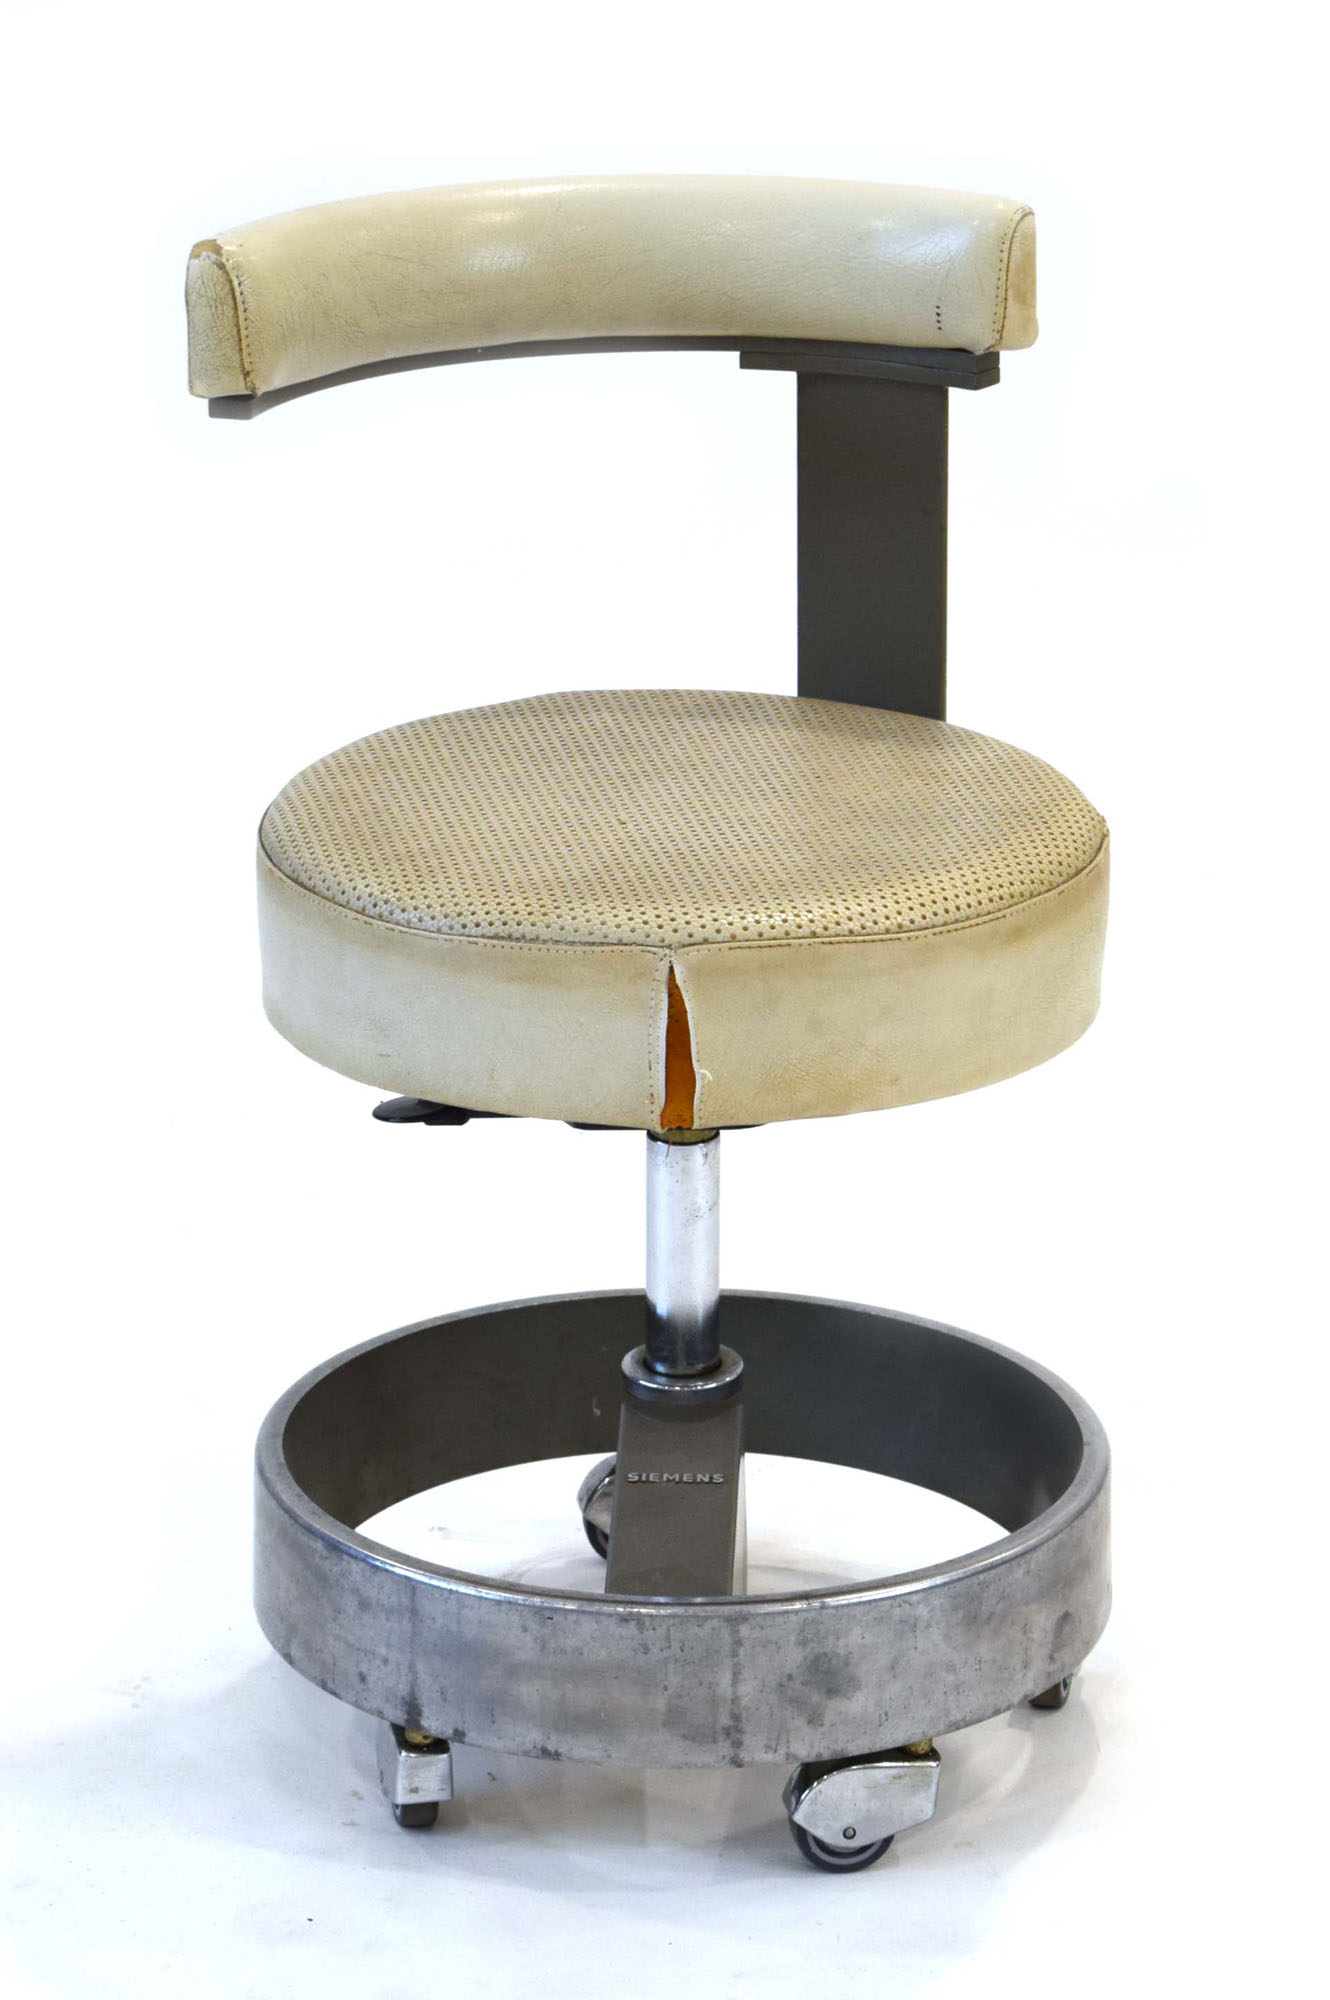 A 1960's Siemens dentist's chair with a grey enamelled frame and white leatherette upholstery *Sold